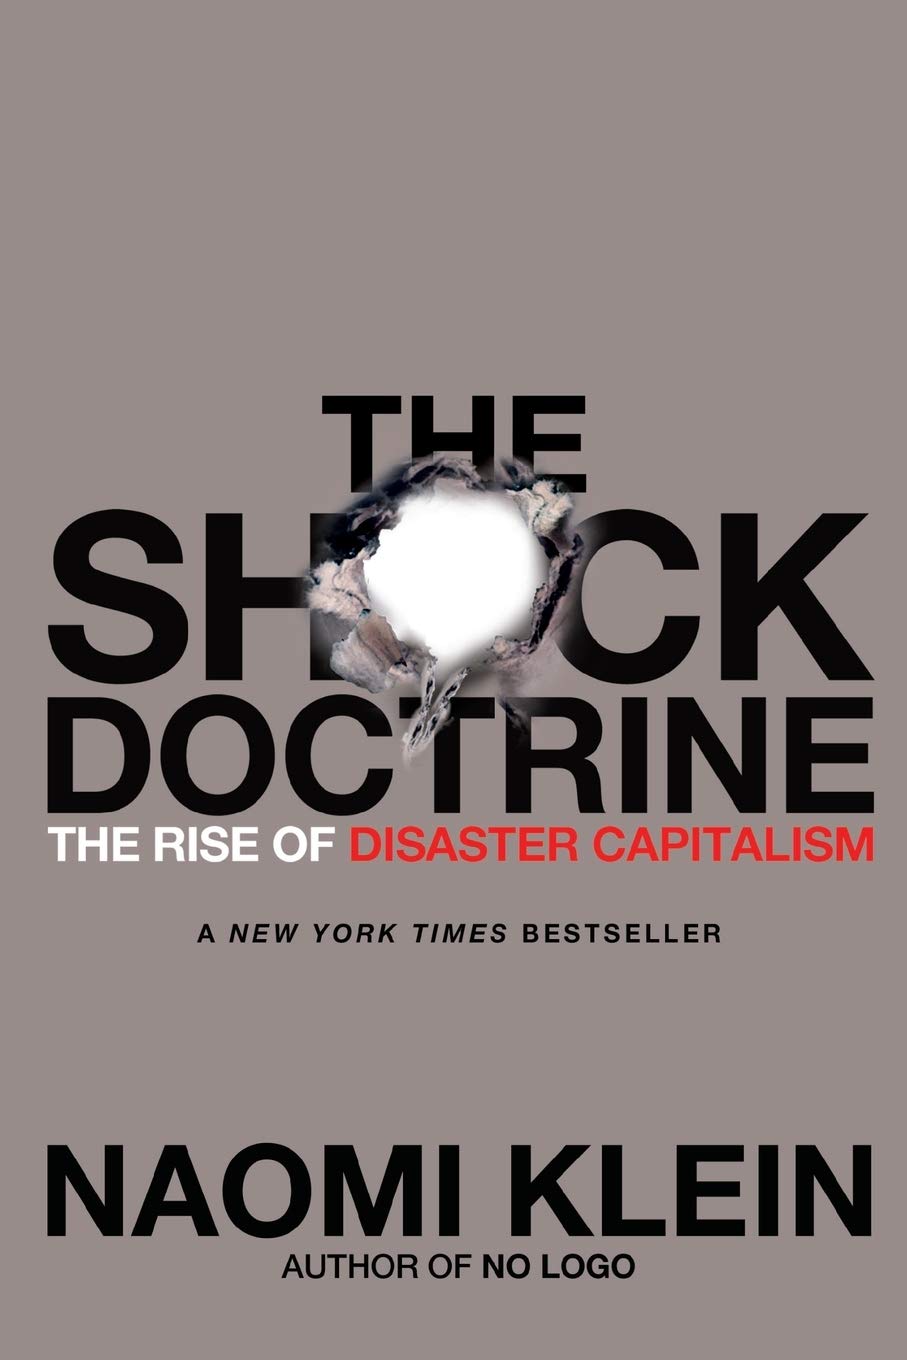 Book Review: The Shock Doctrine by Naomi Klein